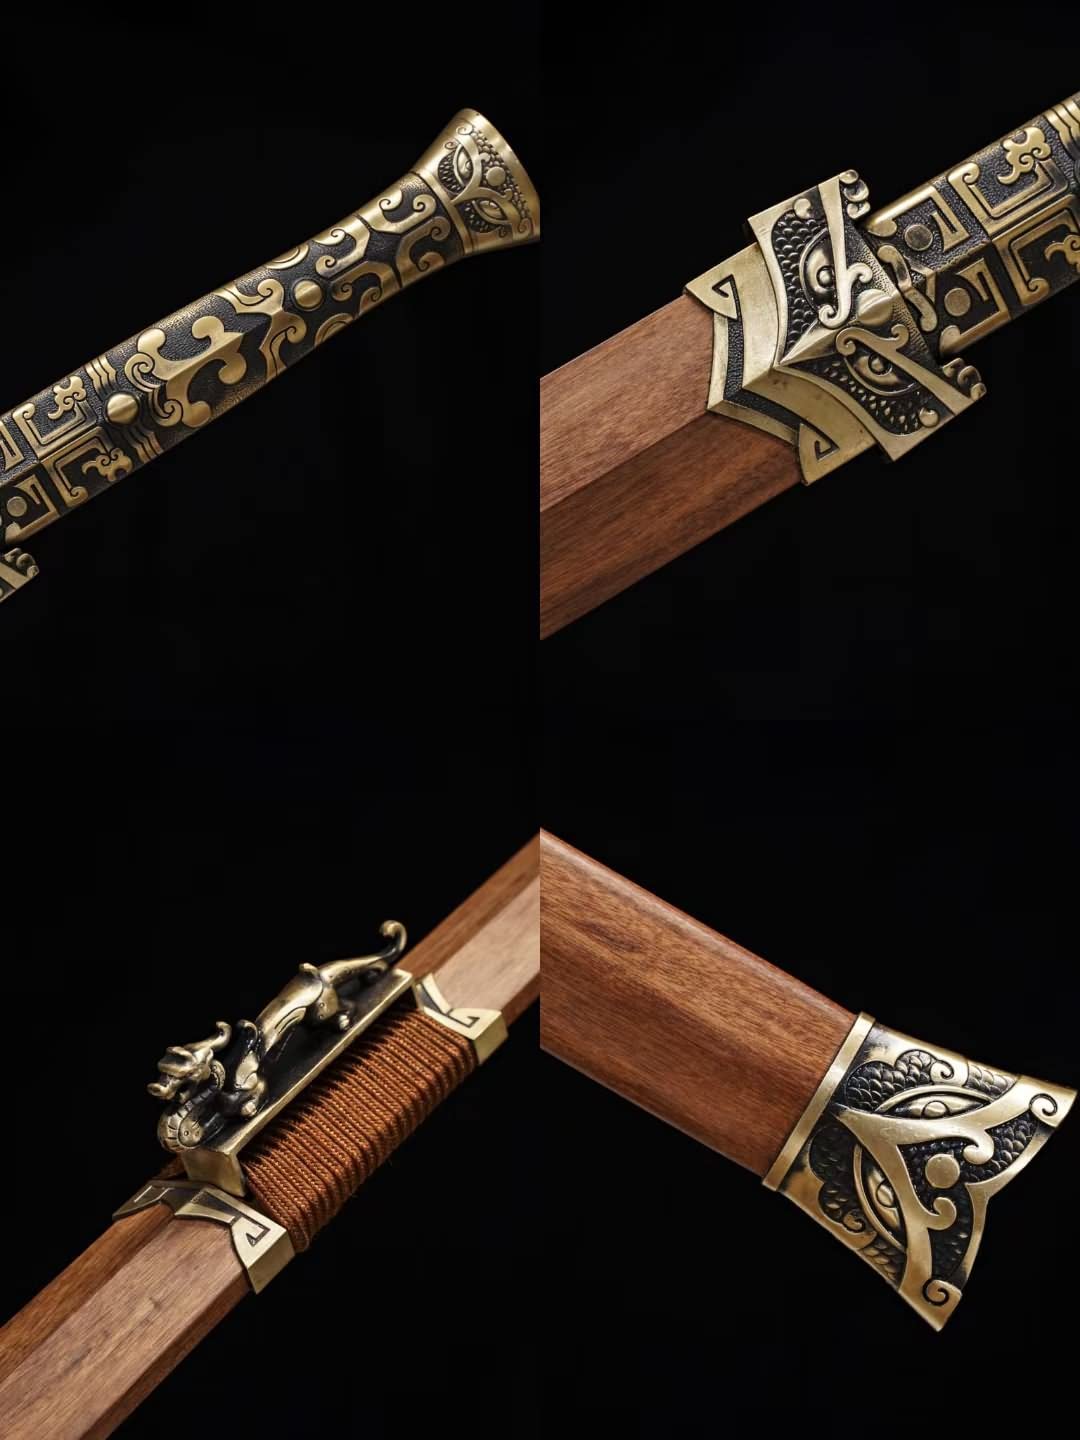 Han jian,Damascus Steel octahedral Blades,Brass Fittings,Two Scabbard Materials